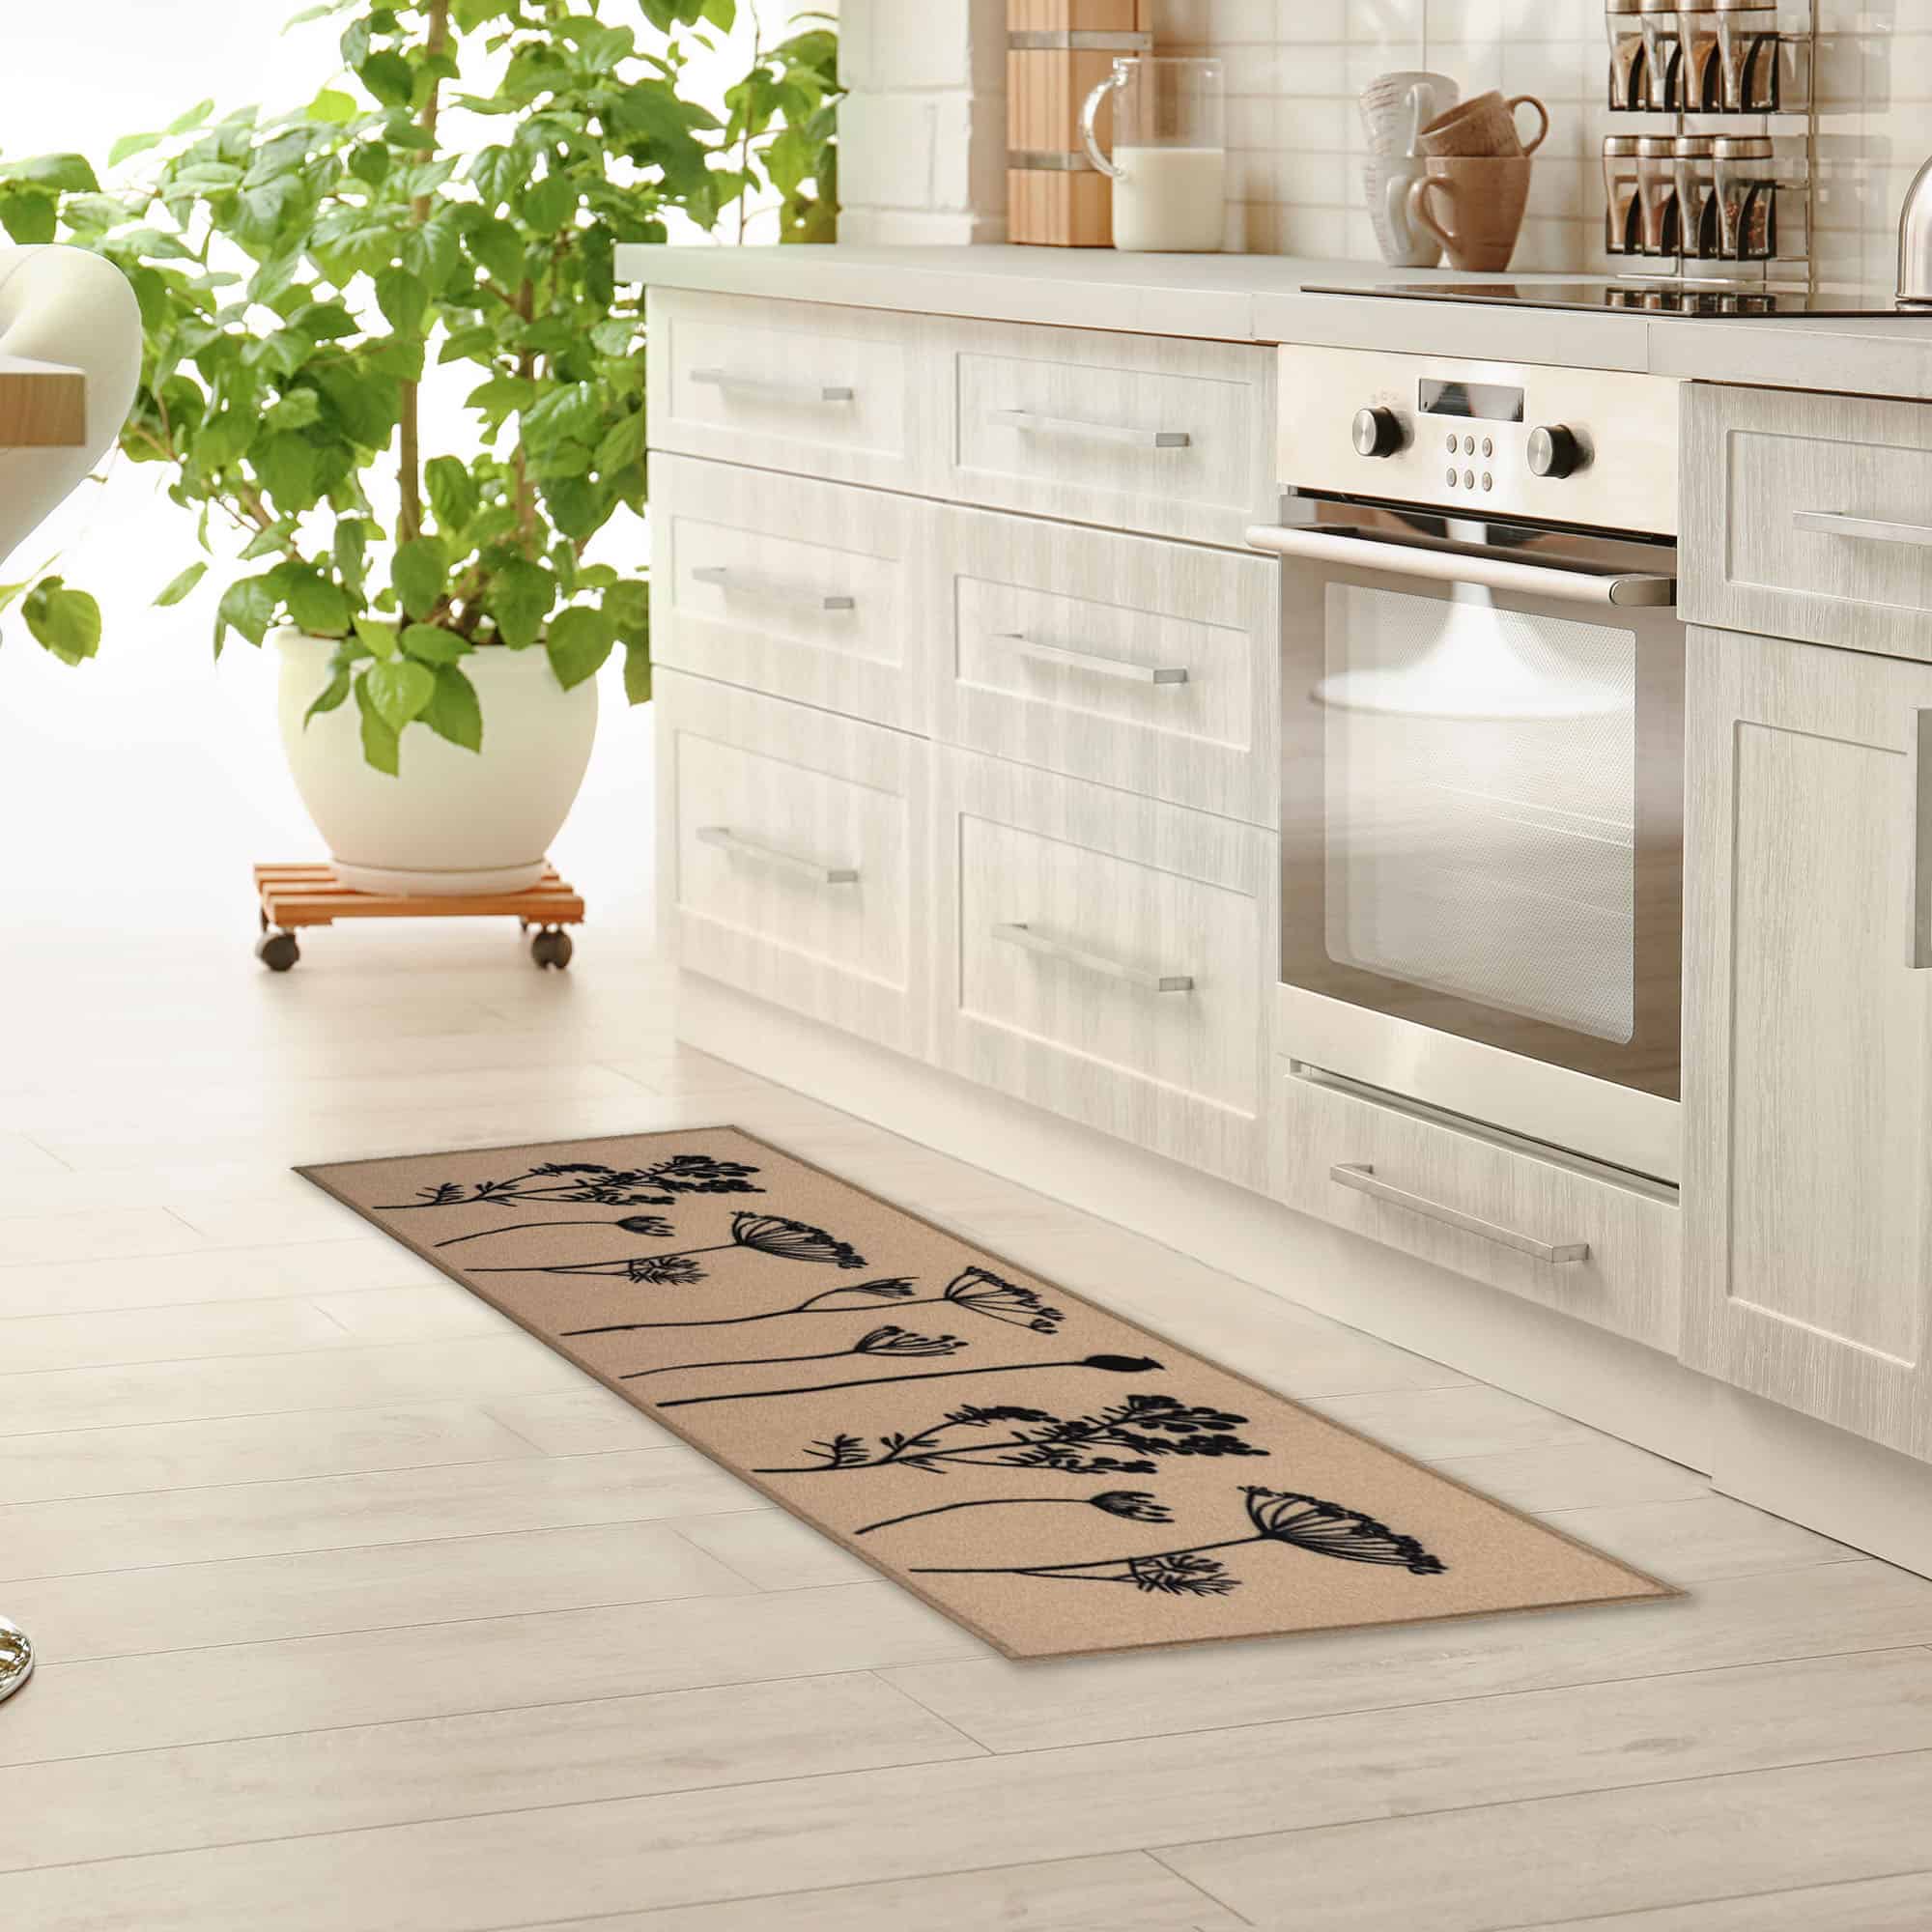 an elegant kitchen with a long runner rug in tan with filed flowers design